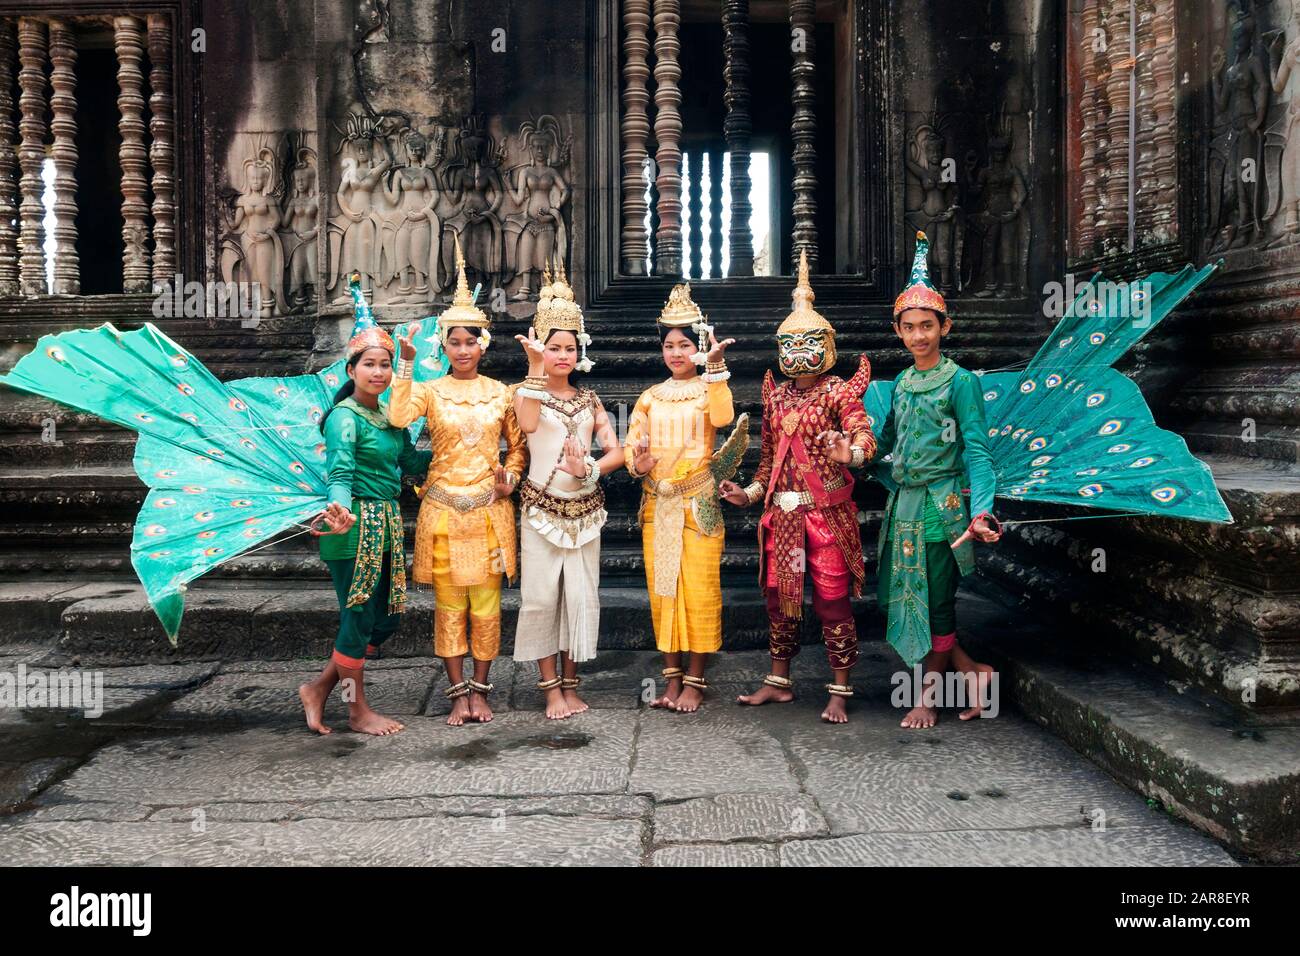 Traditional Apsara Dancers in colorful costumes with striking fans pose in front of Angkor Wat ruins, Siem Reap, Cambodia Stock Photo